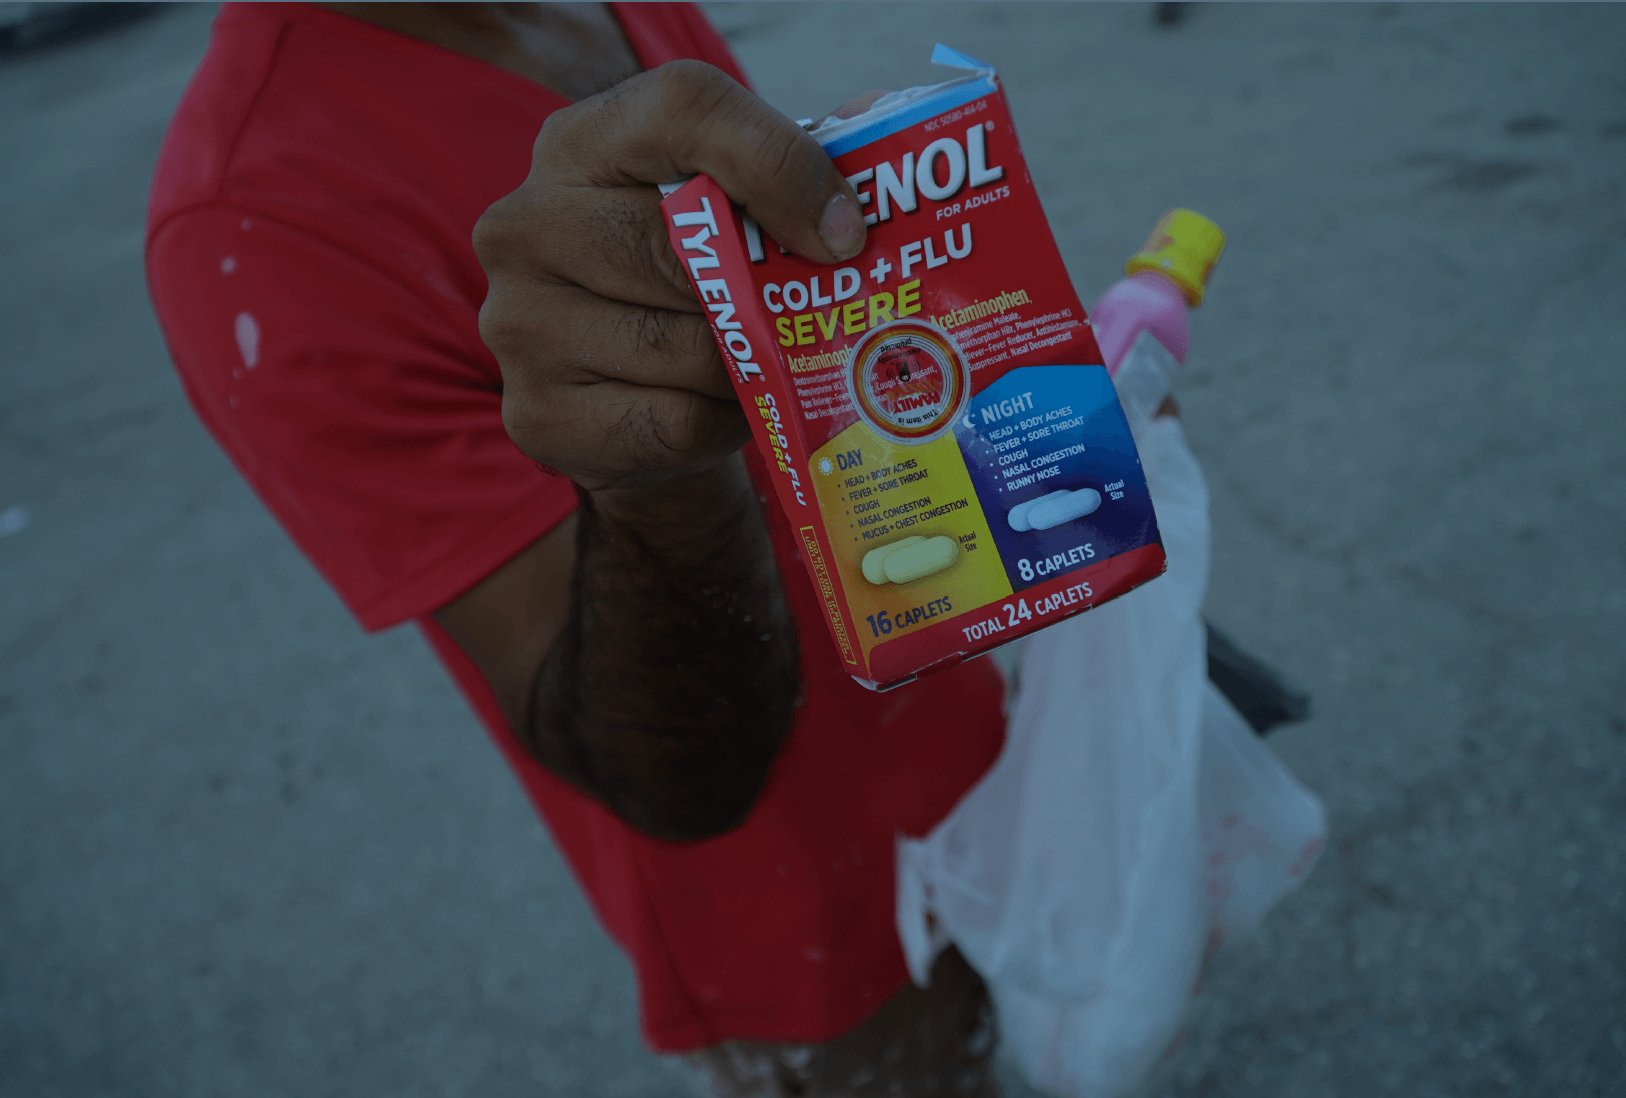 A restoration worker wearing a red shirt holds up a container of Tylenol Cold+Flu, with Pepto Bismol in his other hand. His face is not within the frame. The worker stands in a parking lot in Fort Myers where workers are picked up to clear out debris from structures destroyed by Hurricane Ian. (Jiahui Huang/Columbia Journalism Investigations)